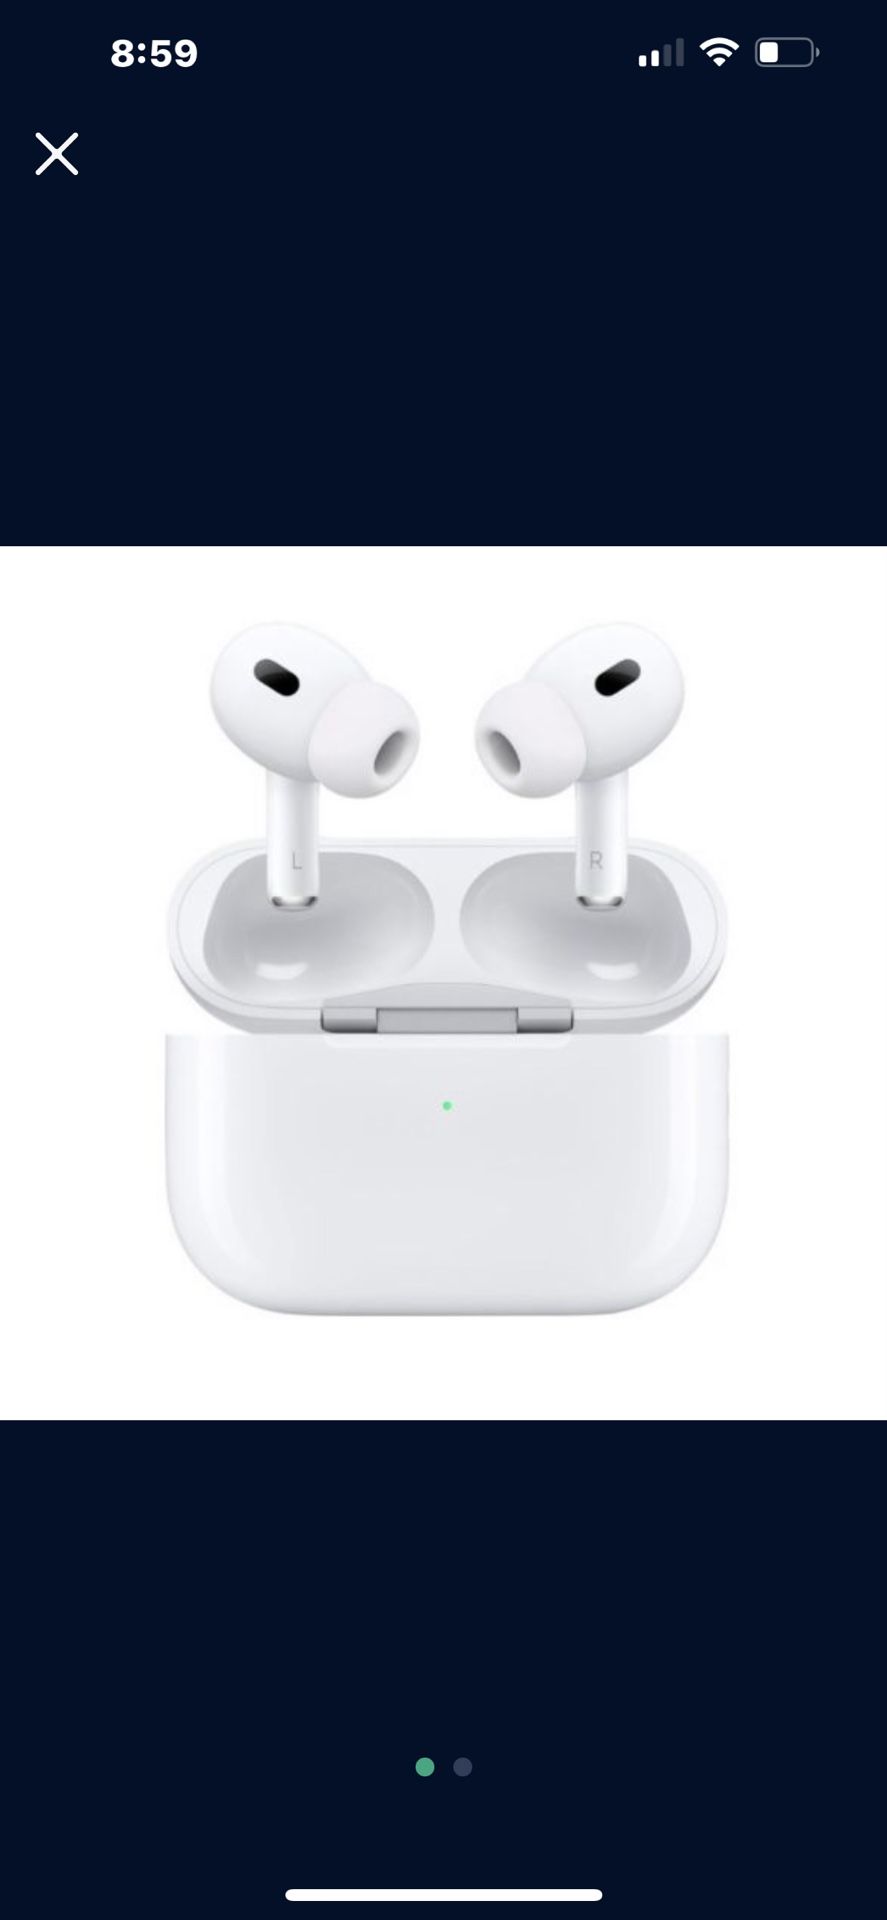 NEW IN BOX‼️ Apple - AirPods Pro (2nd generation) - White